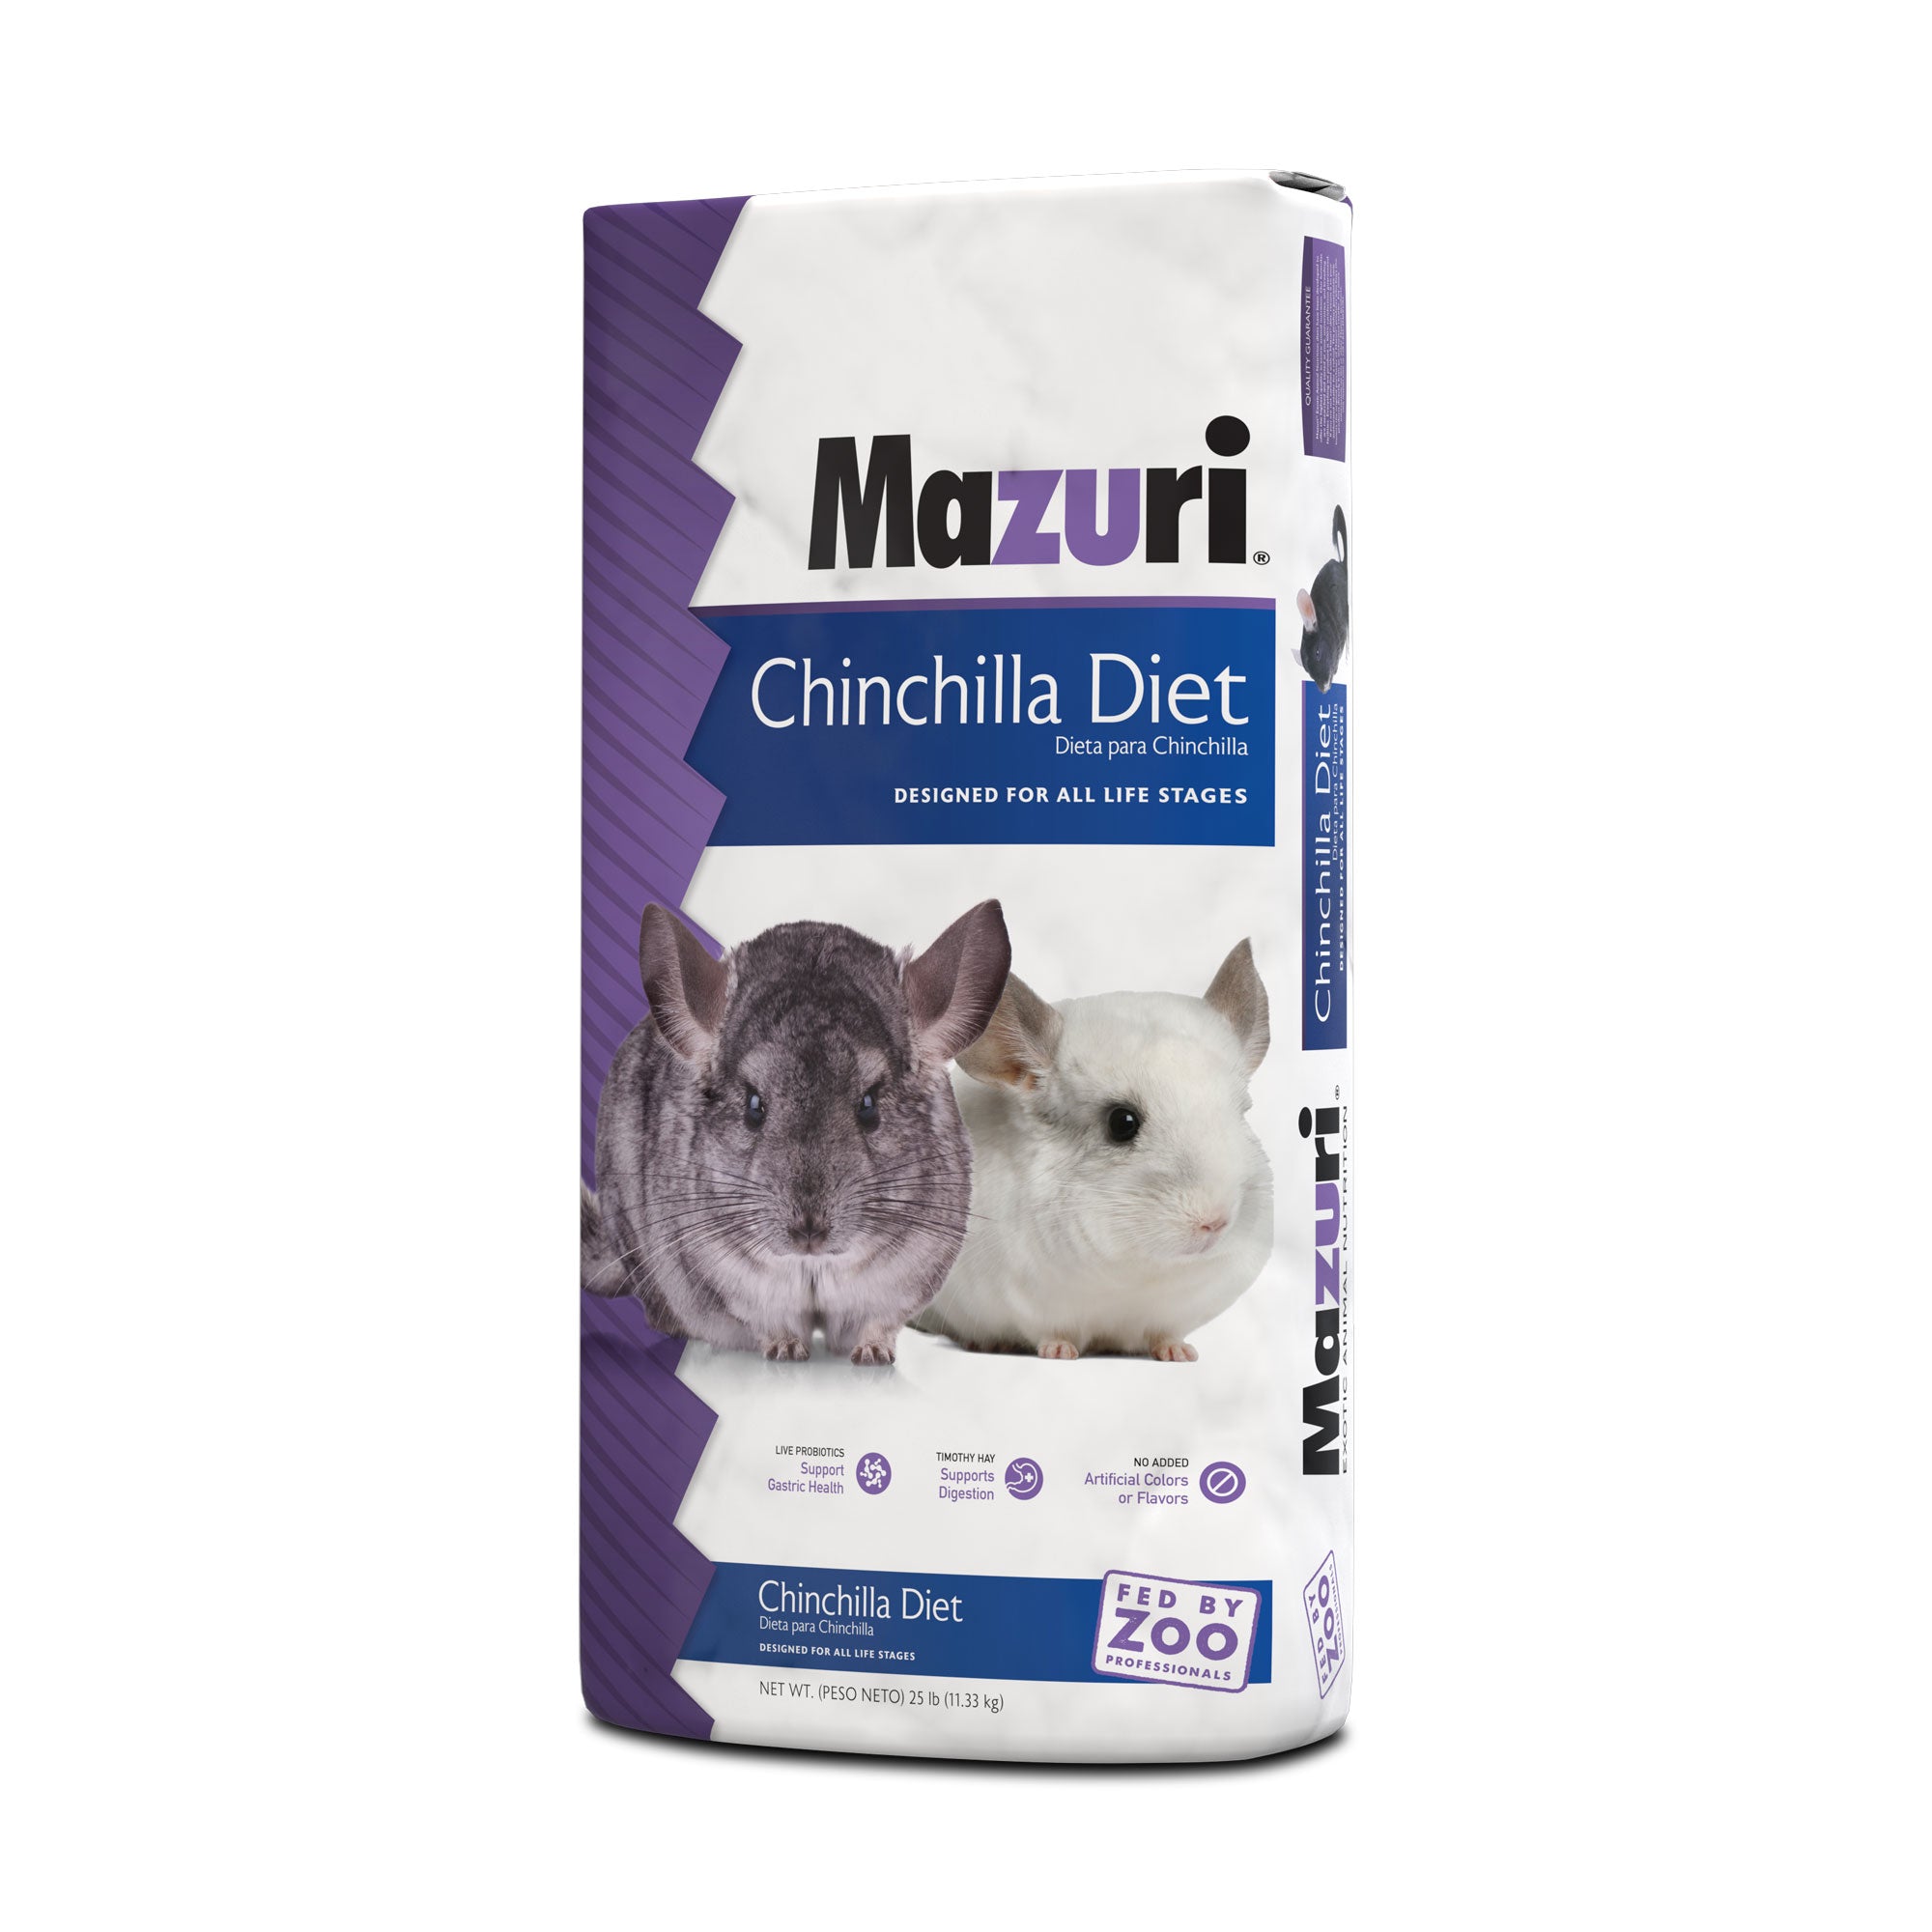 Chinchilla Diet 25 pound bag front and gusset